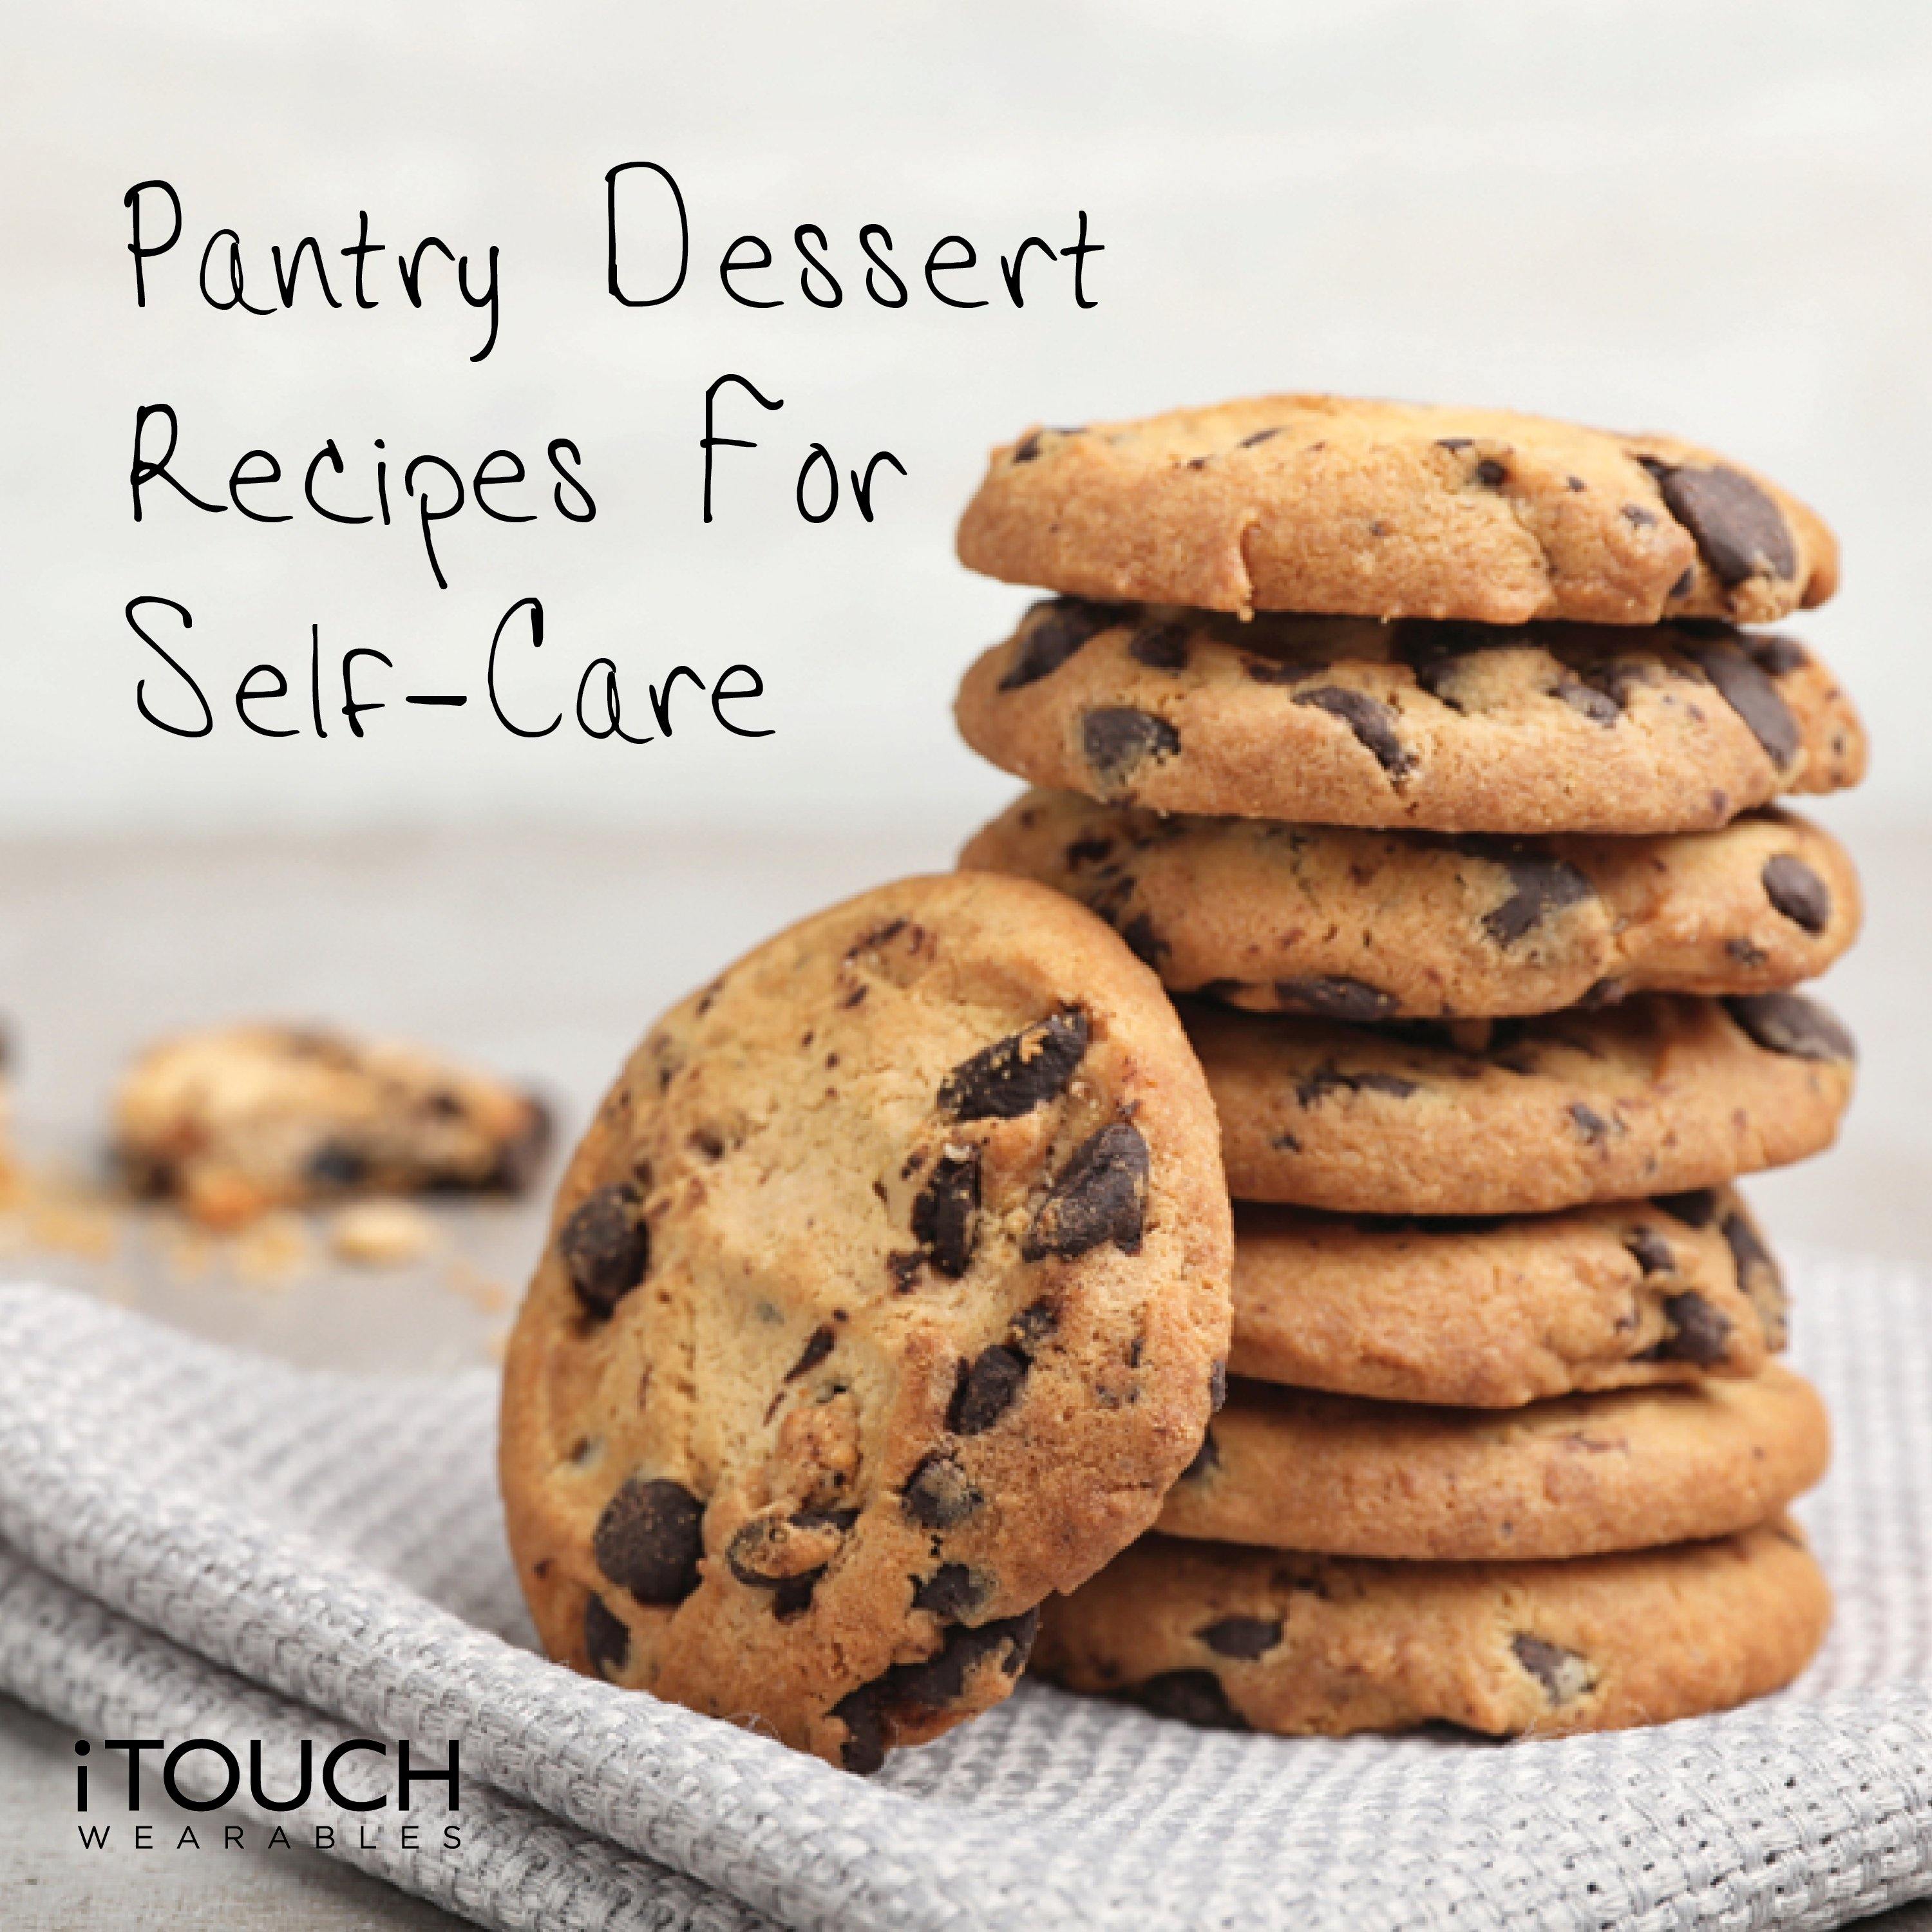 Pantry Dessert Recipes For Self-Care - iTOUCH Wearables